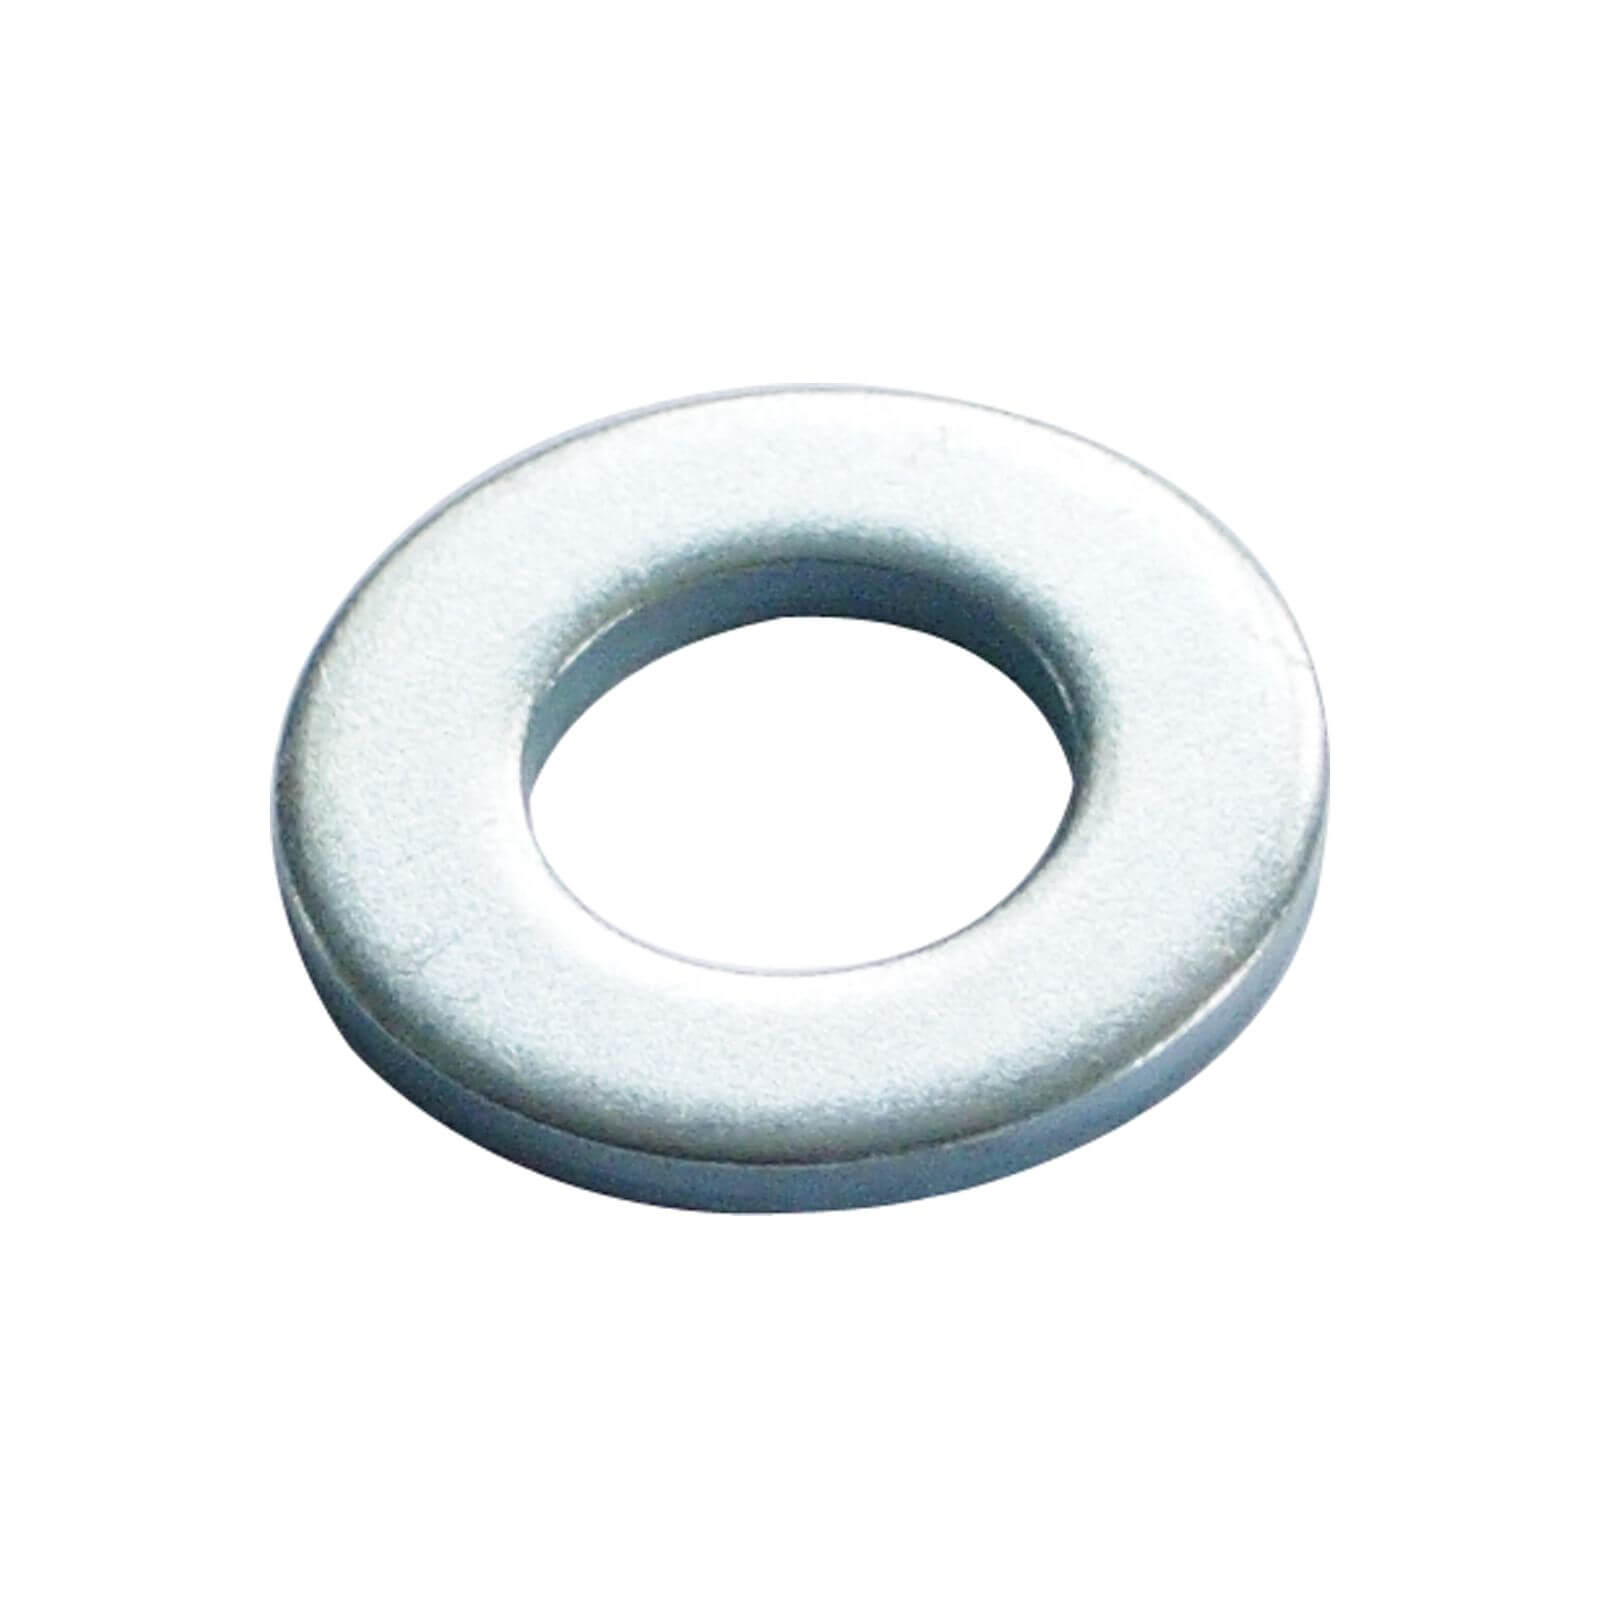 Washer - Bright Zinc Plated - M10 - 15 Pack